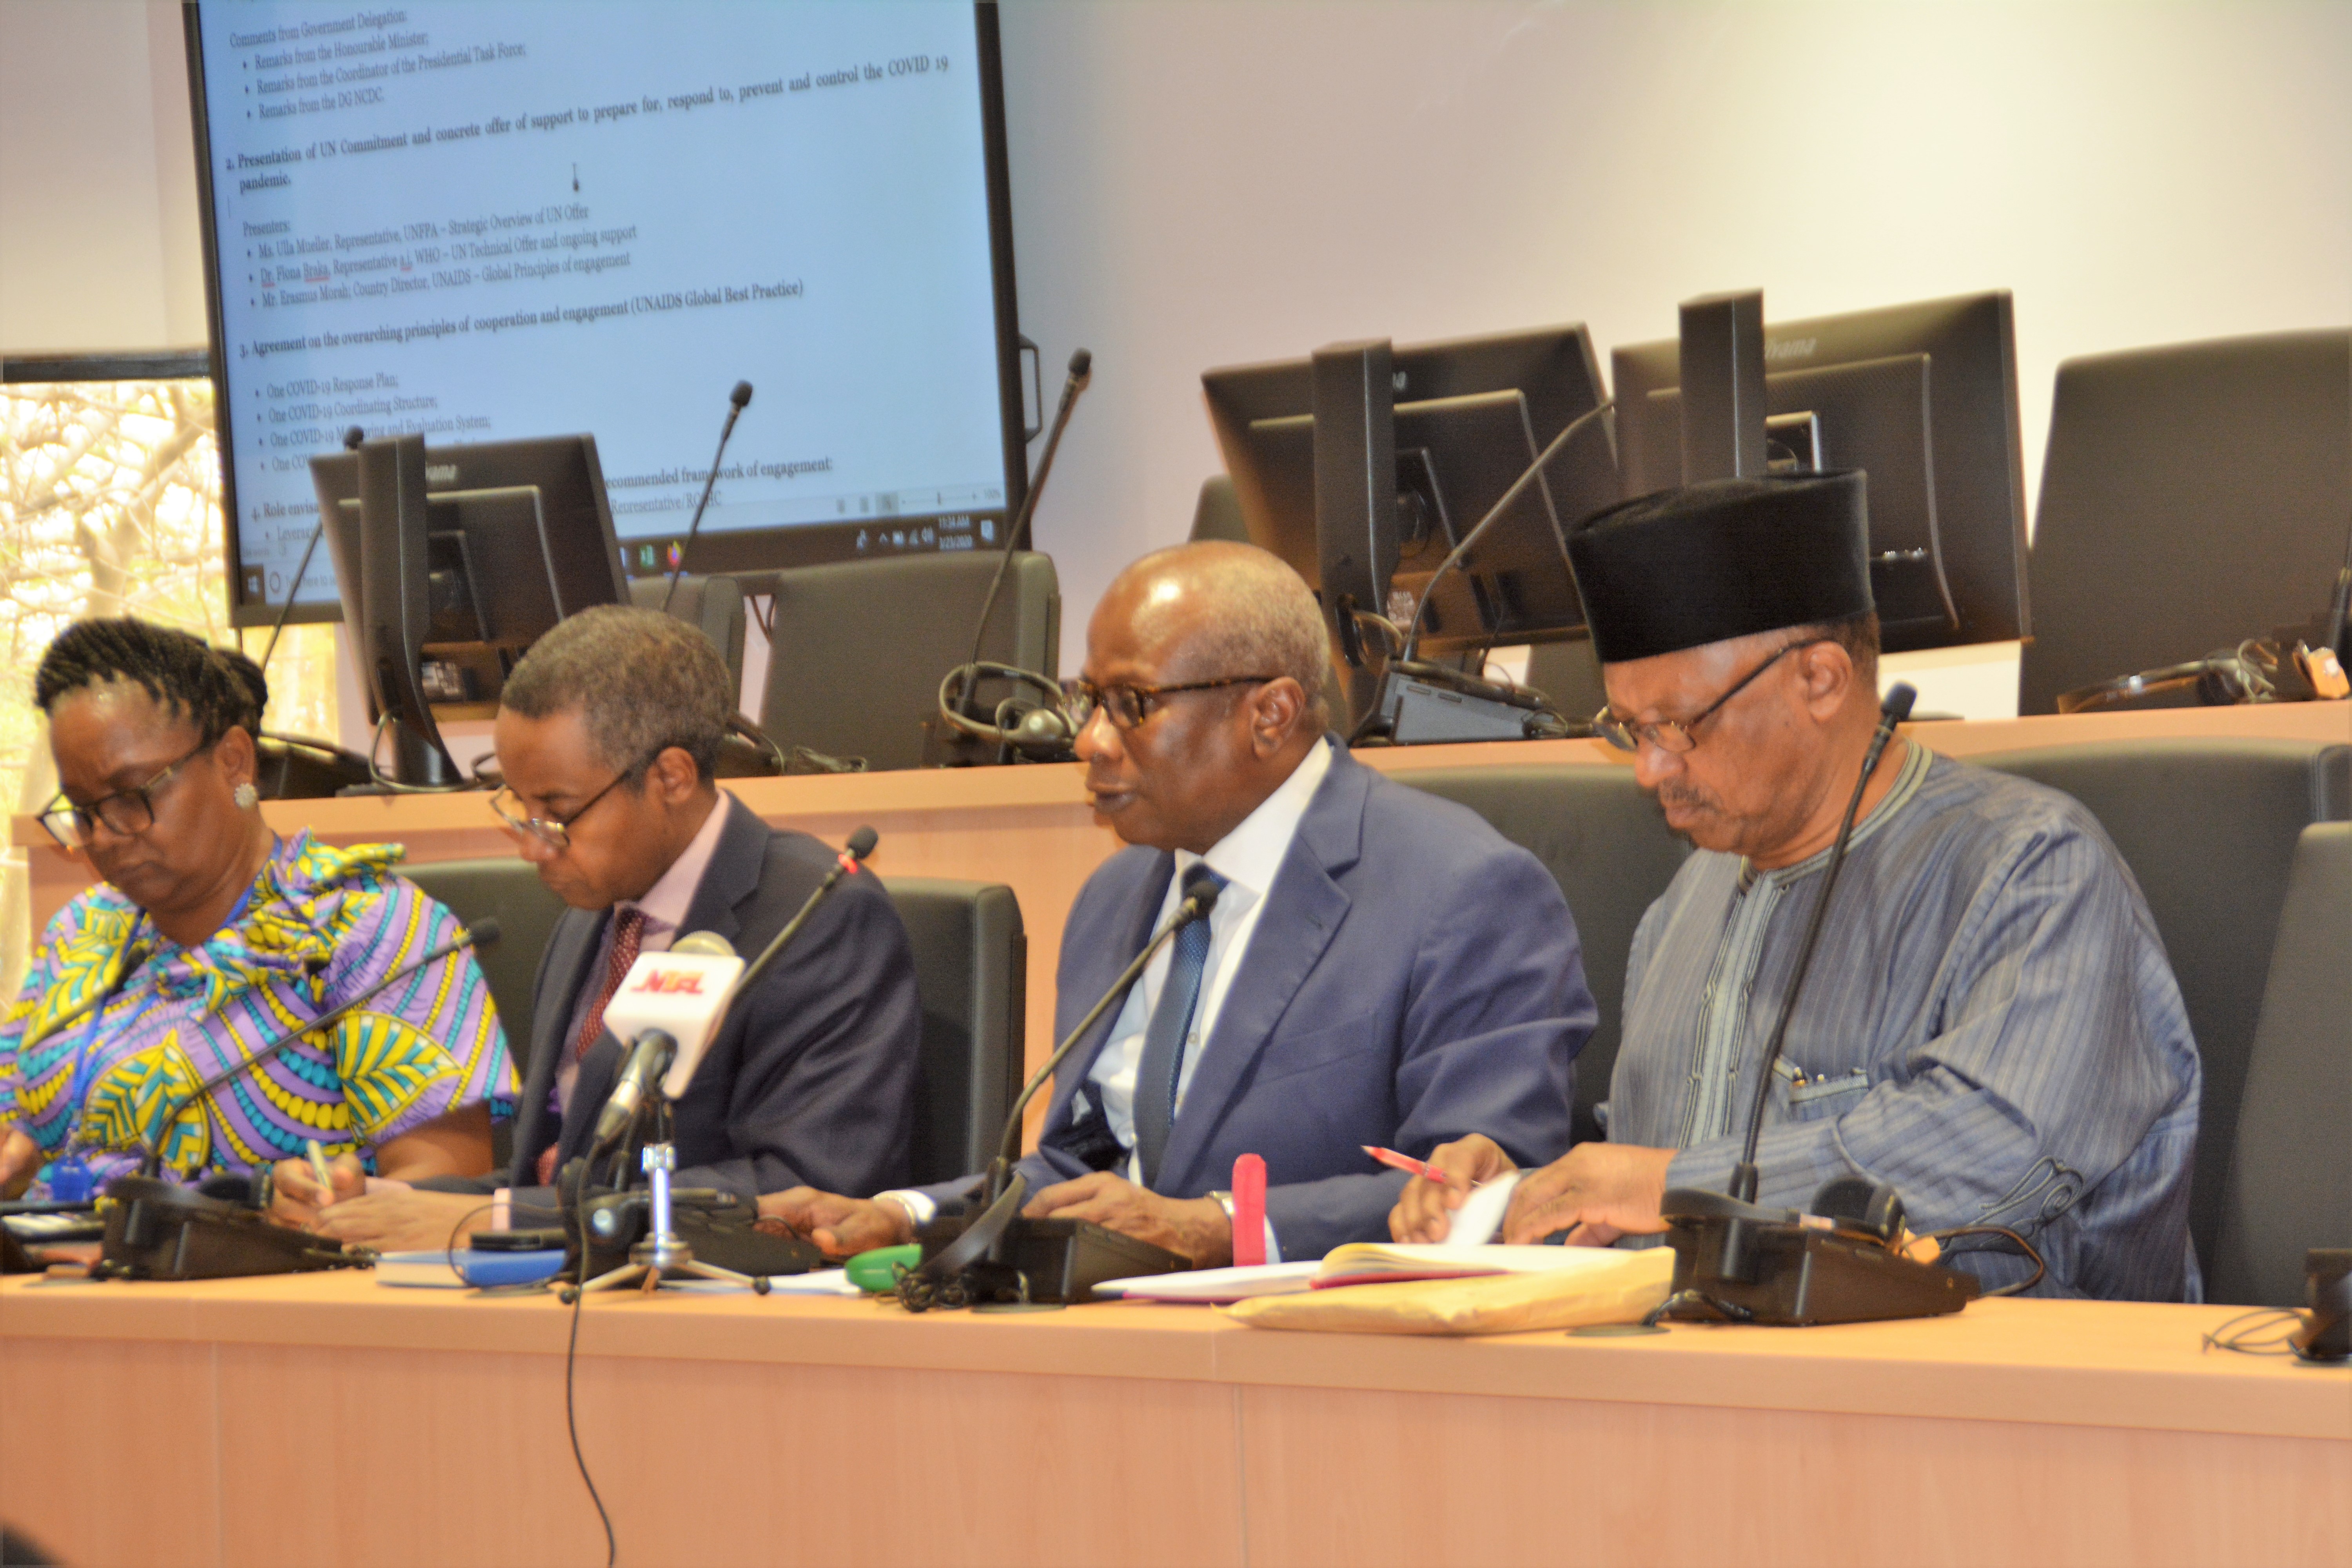 R-L: Minister of Health, Dr. Osagie Ehanire; UN Resident-Coordinator Edward Kallon; and other dignitaries at the meeting.